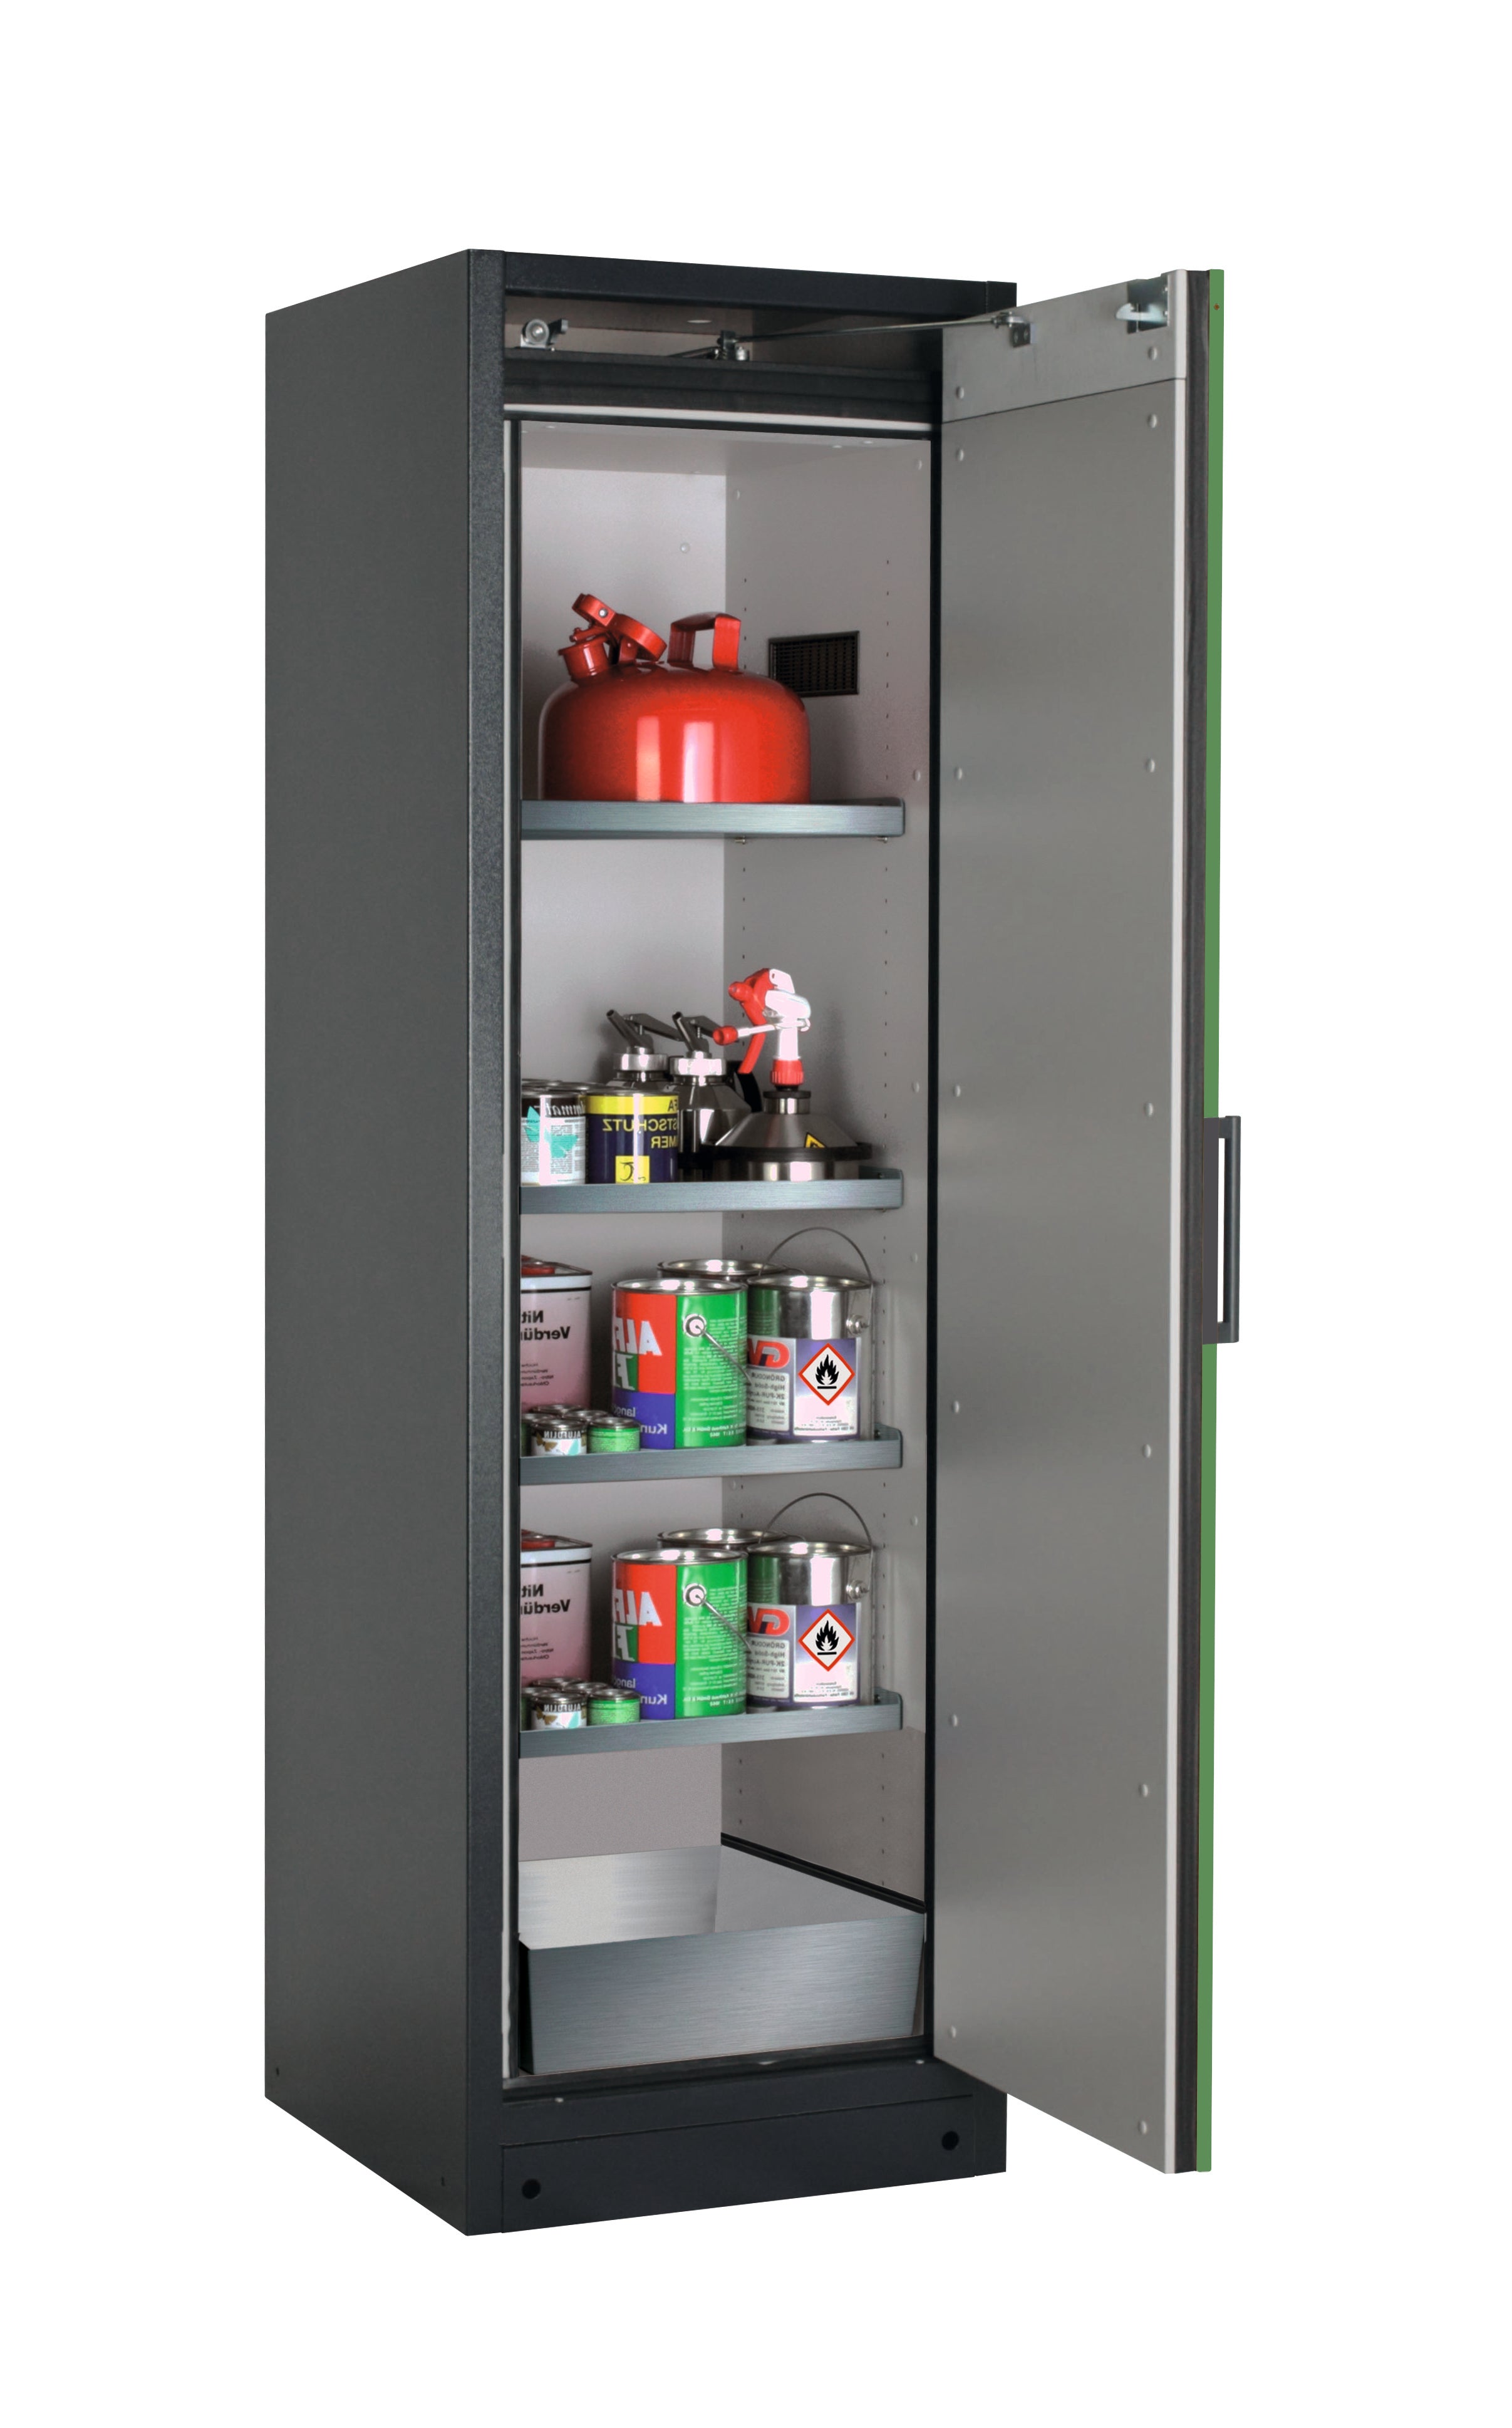 Type 90 safety storage cabinet Q-PEGASUS-90 model Q90.195.060.WDACR in reseda green RAL 6011 with 4x shelf standard (stainless steel 1.4301),